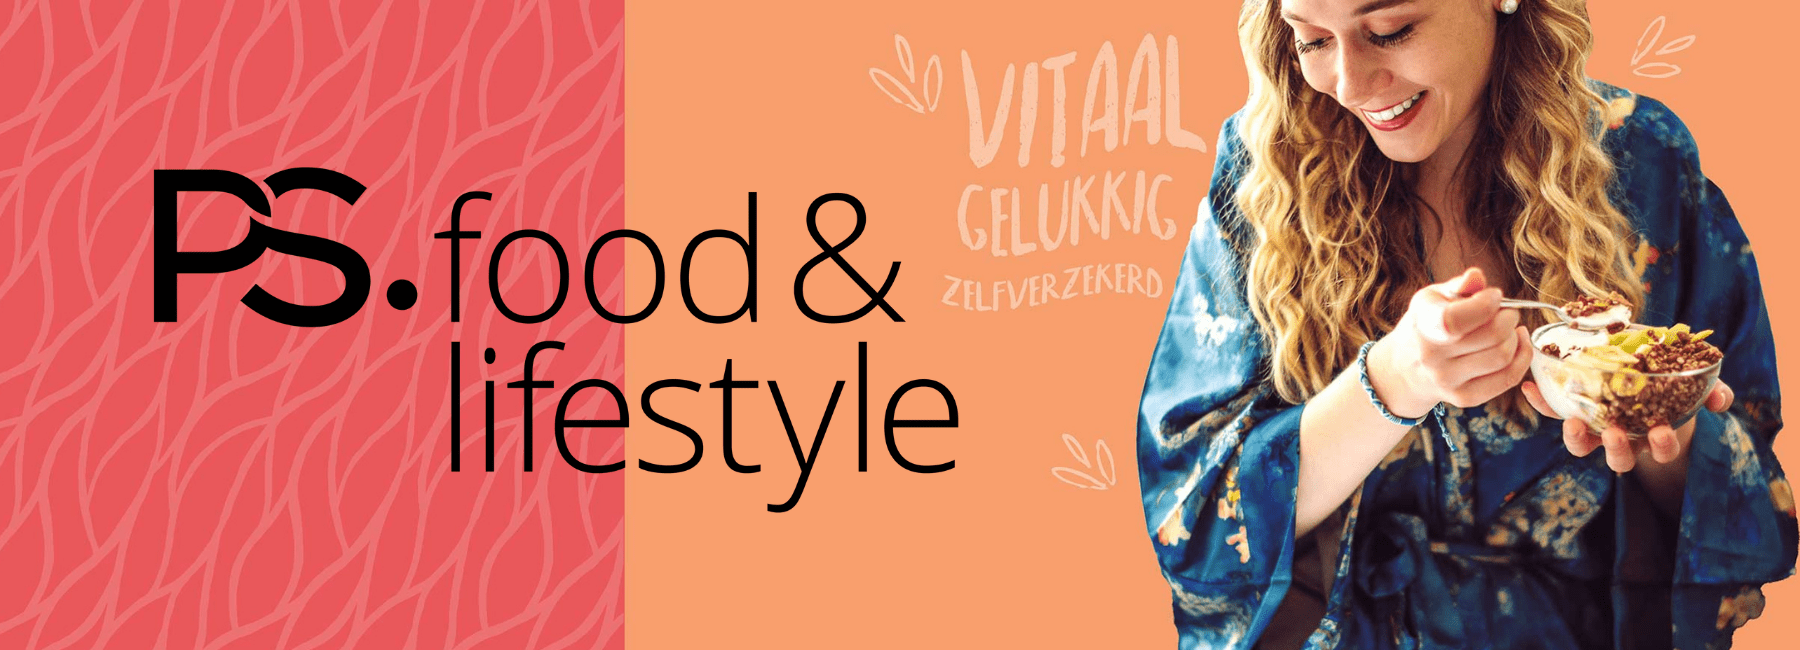 ps-food-lifestyle-banner_1